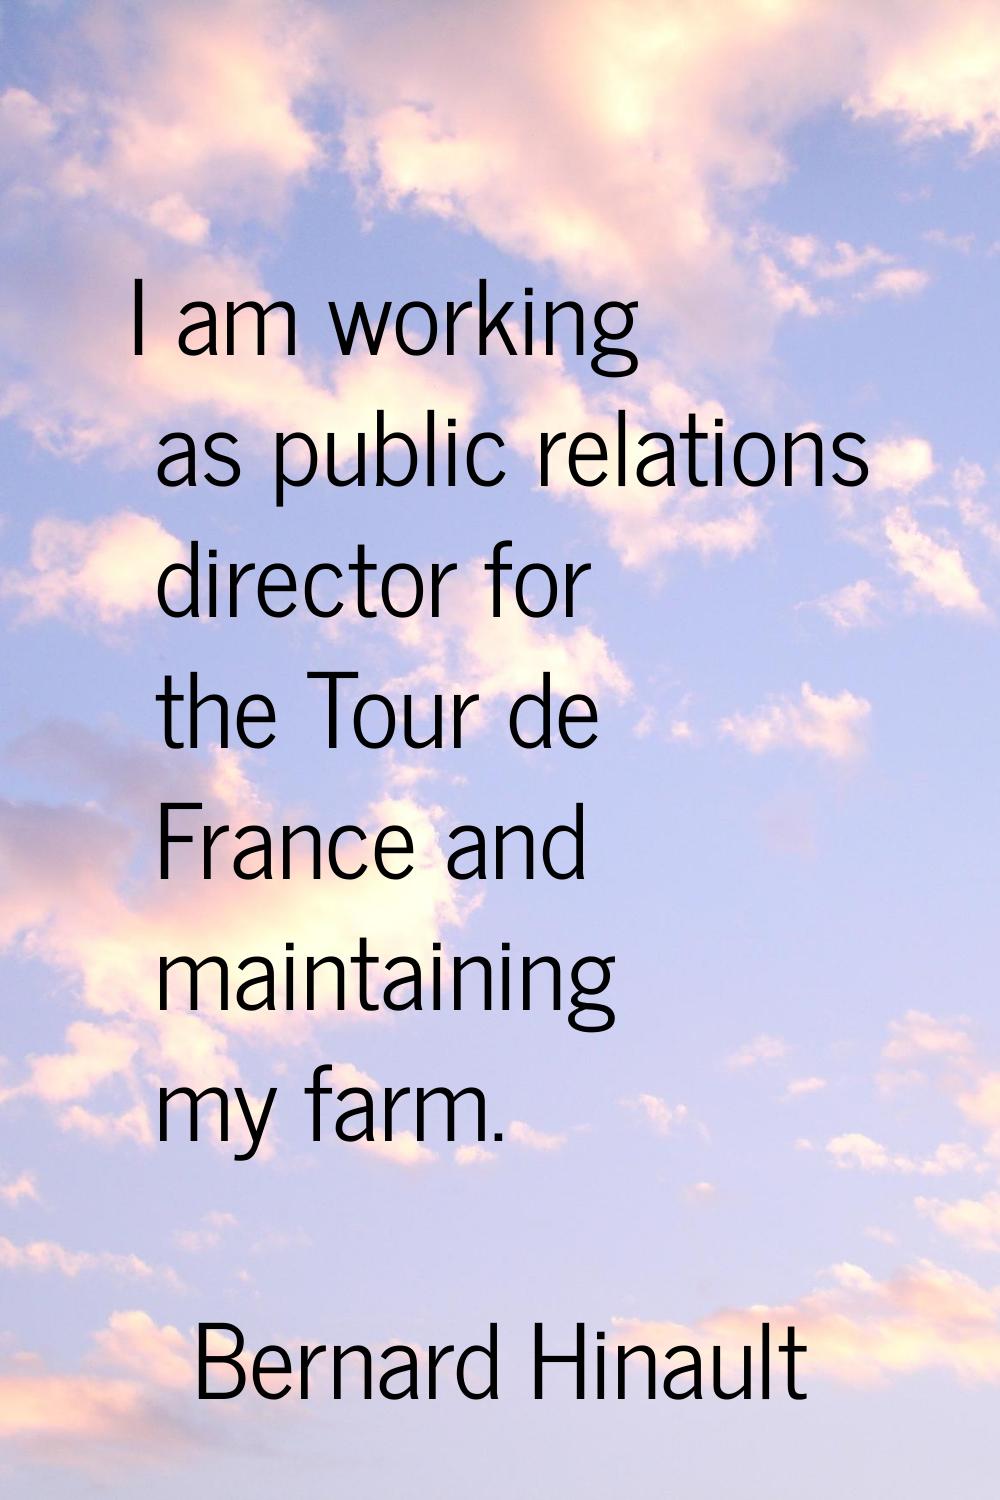 I am working as public relations director for the Tour de France and maintaining my farm.